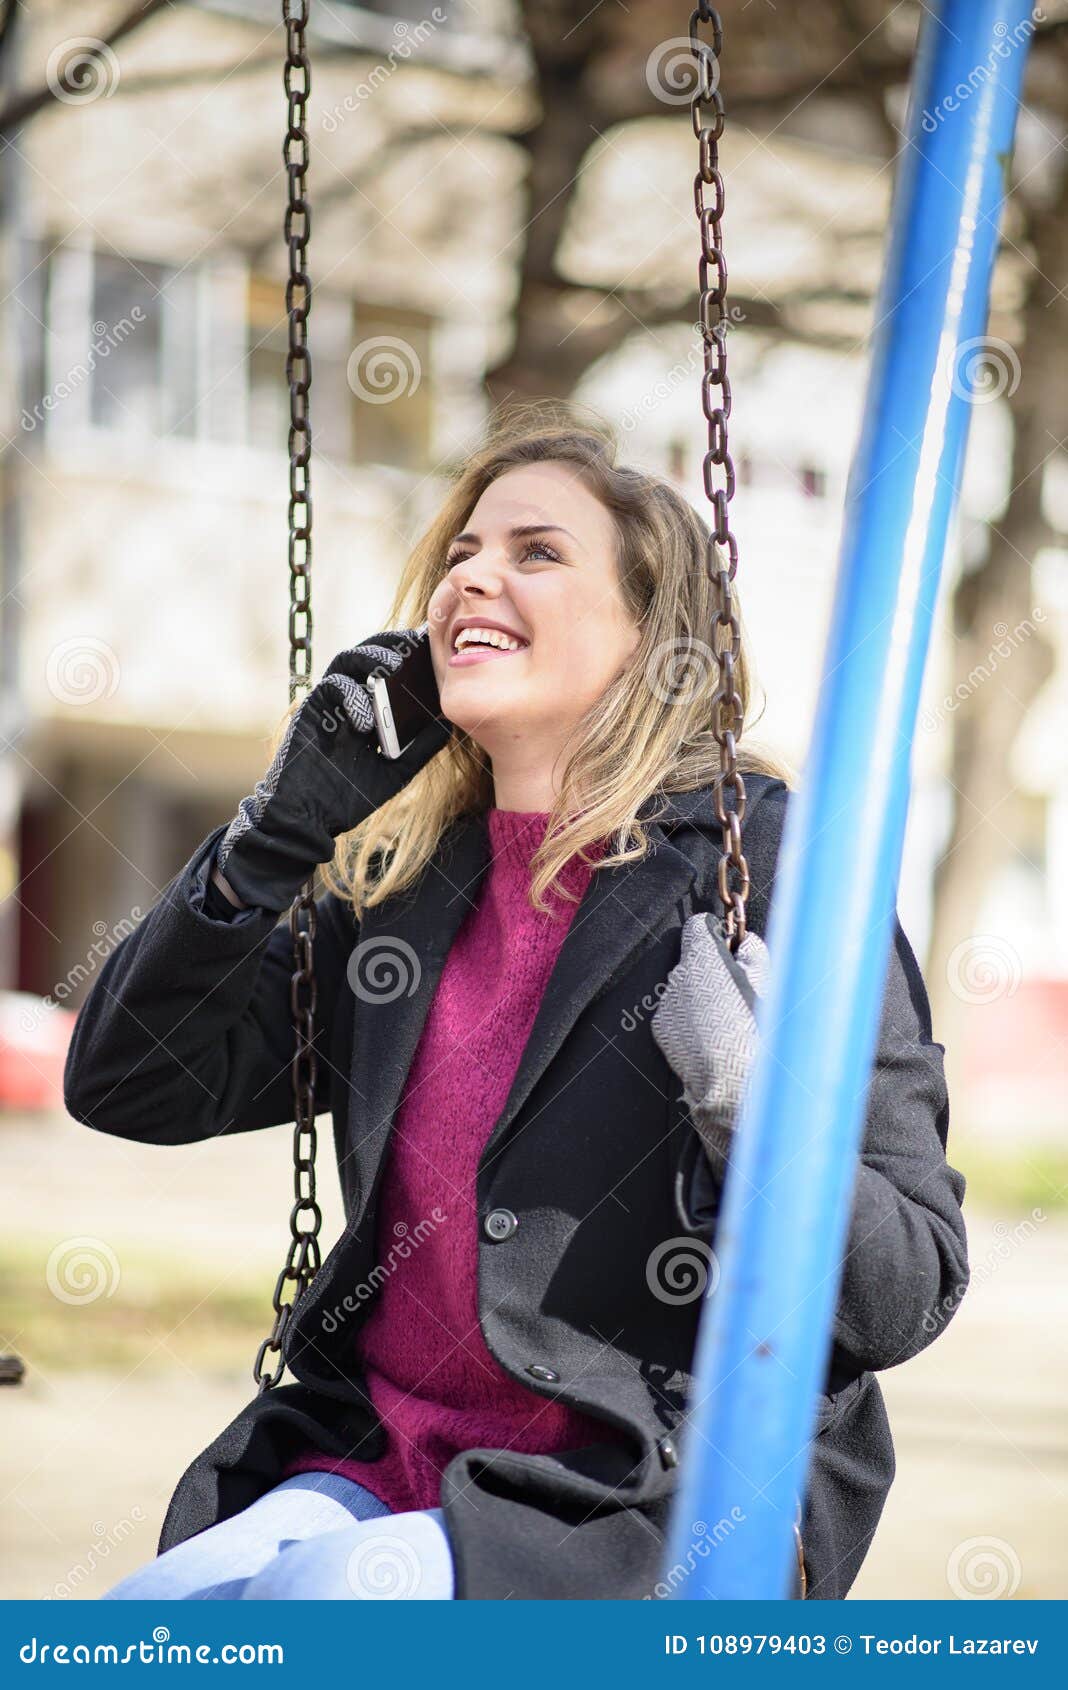 Sweet Young Woman Having a Lovely Conversation while Swinging in a Park Stock Image